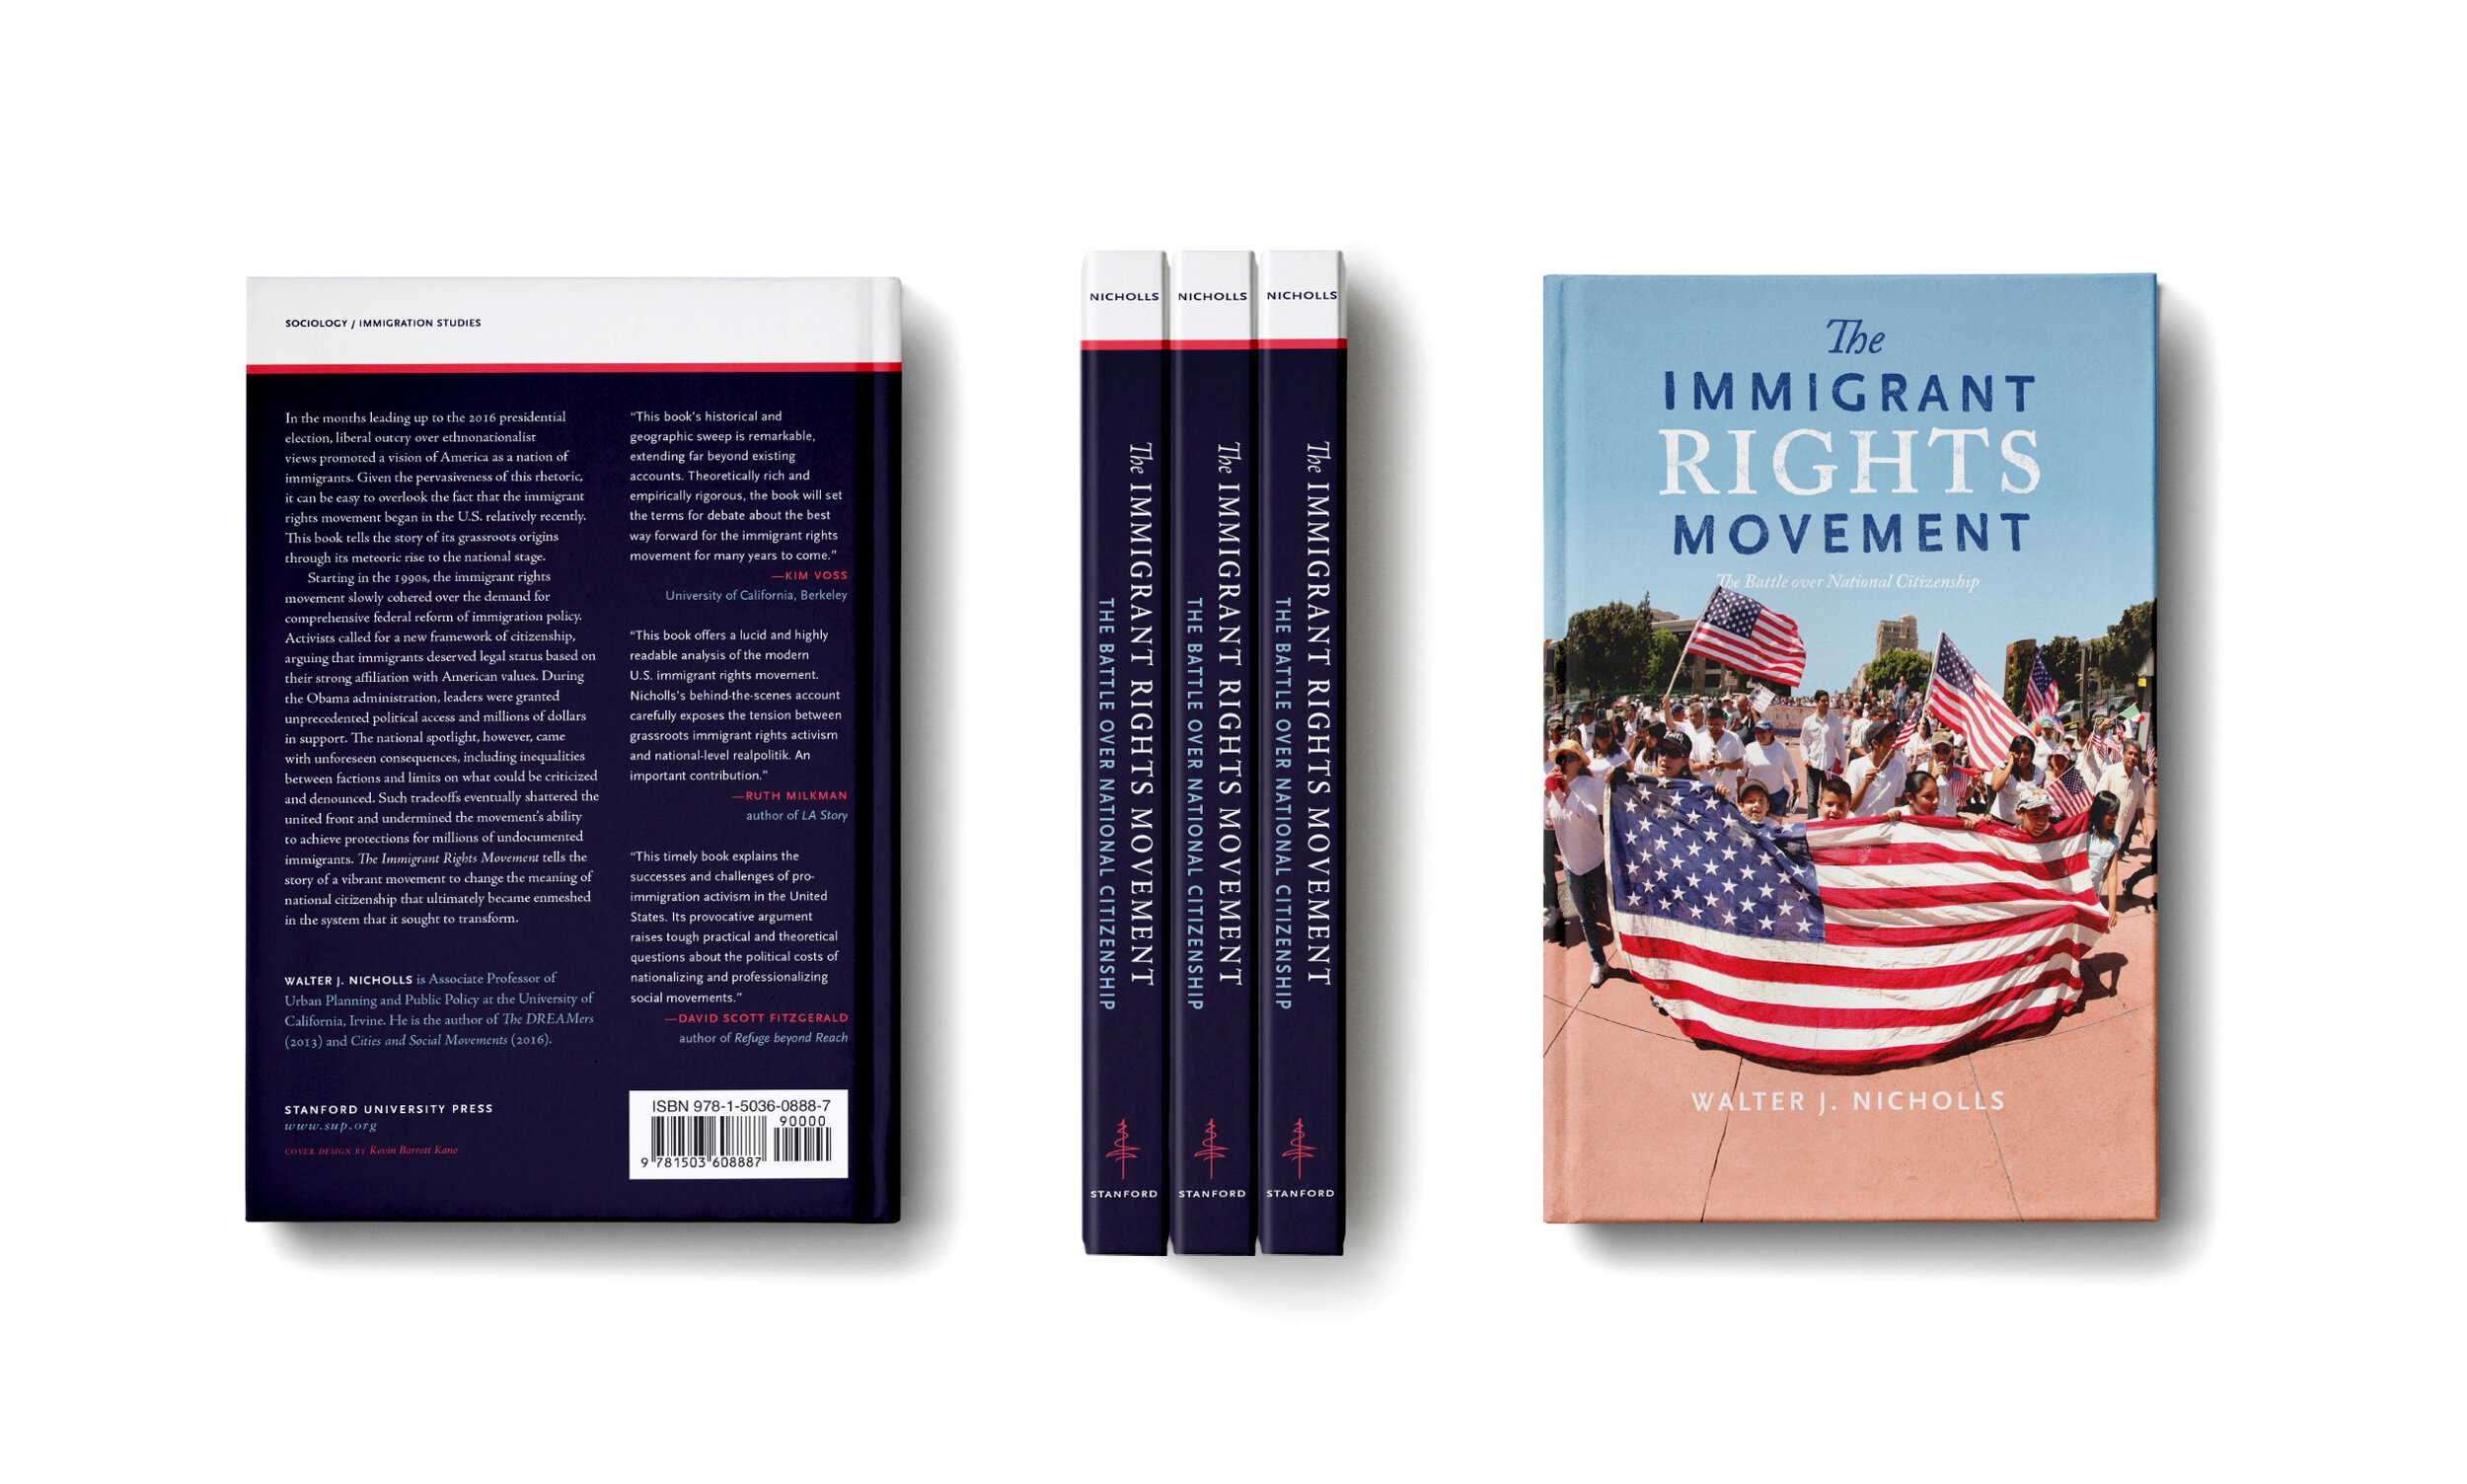 The Immigrant Rights Movement, by Walter Nicholls (Stanford, 2019)